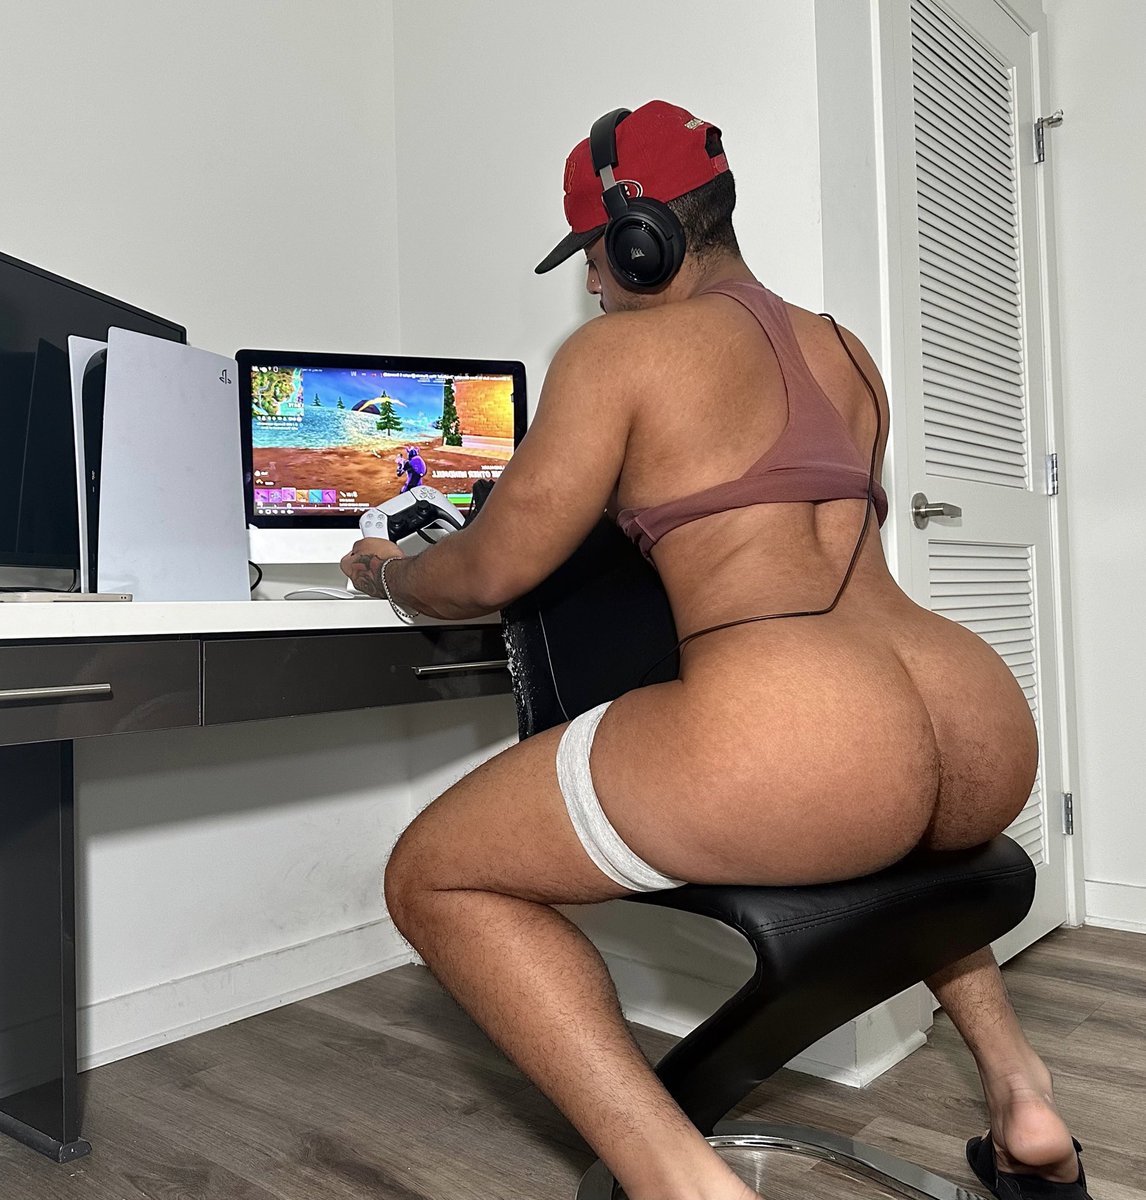 Which one you choosing😉 1.Play the game w/ me 🎮 2.Eat my ass🍑 3.Suck my dick🍆 4.Backshots while playin’ the game😏